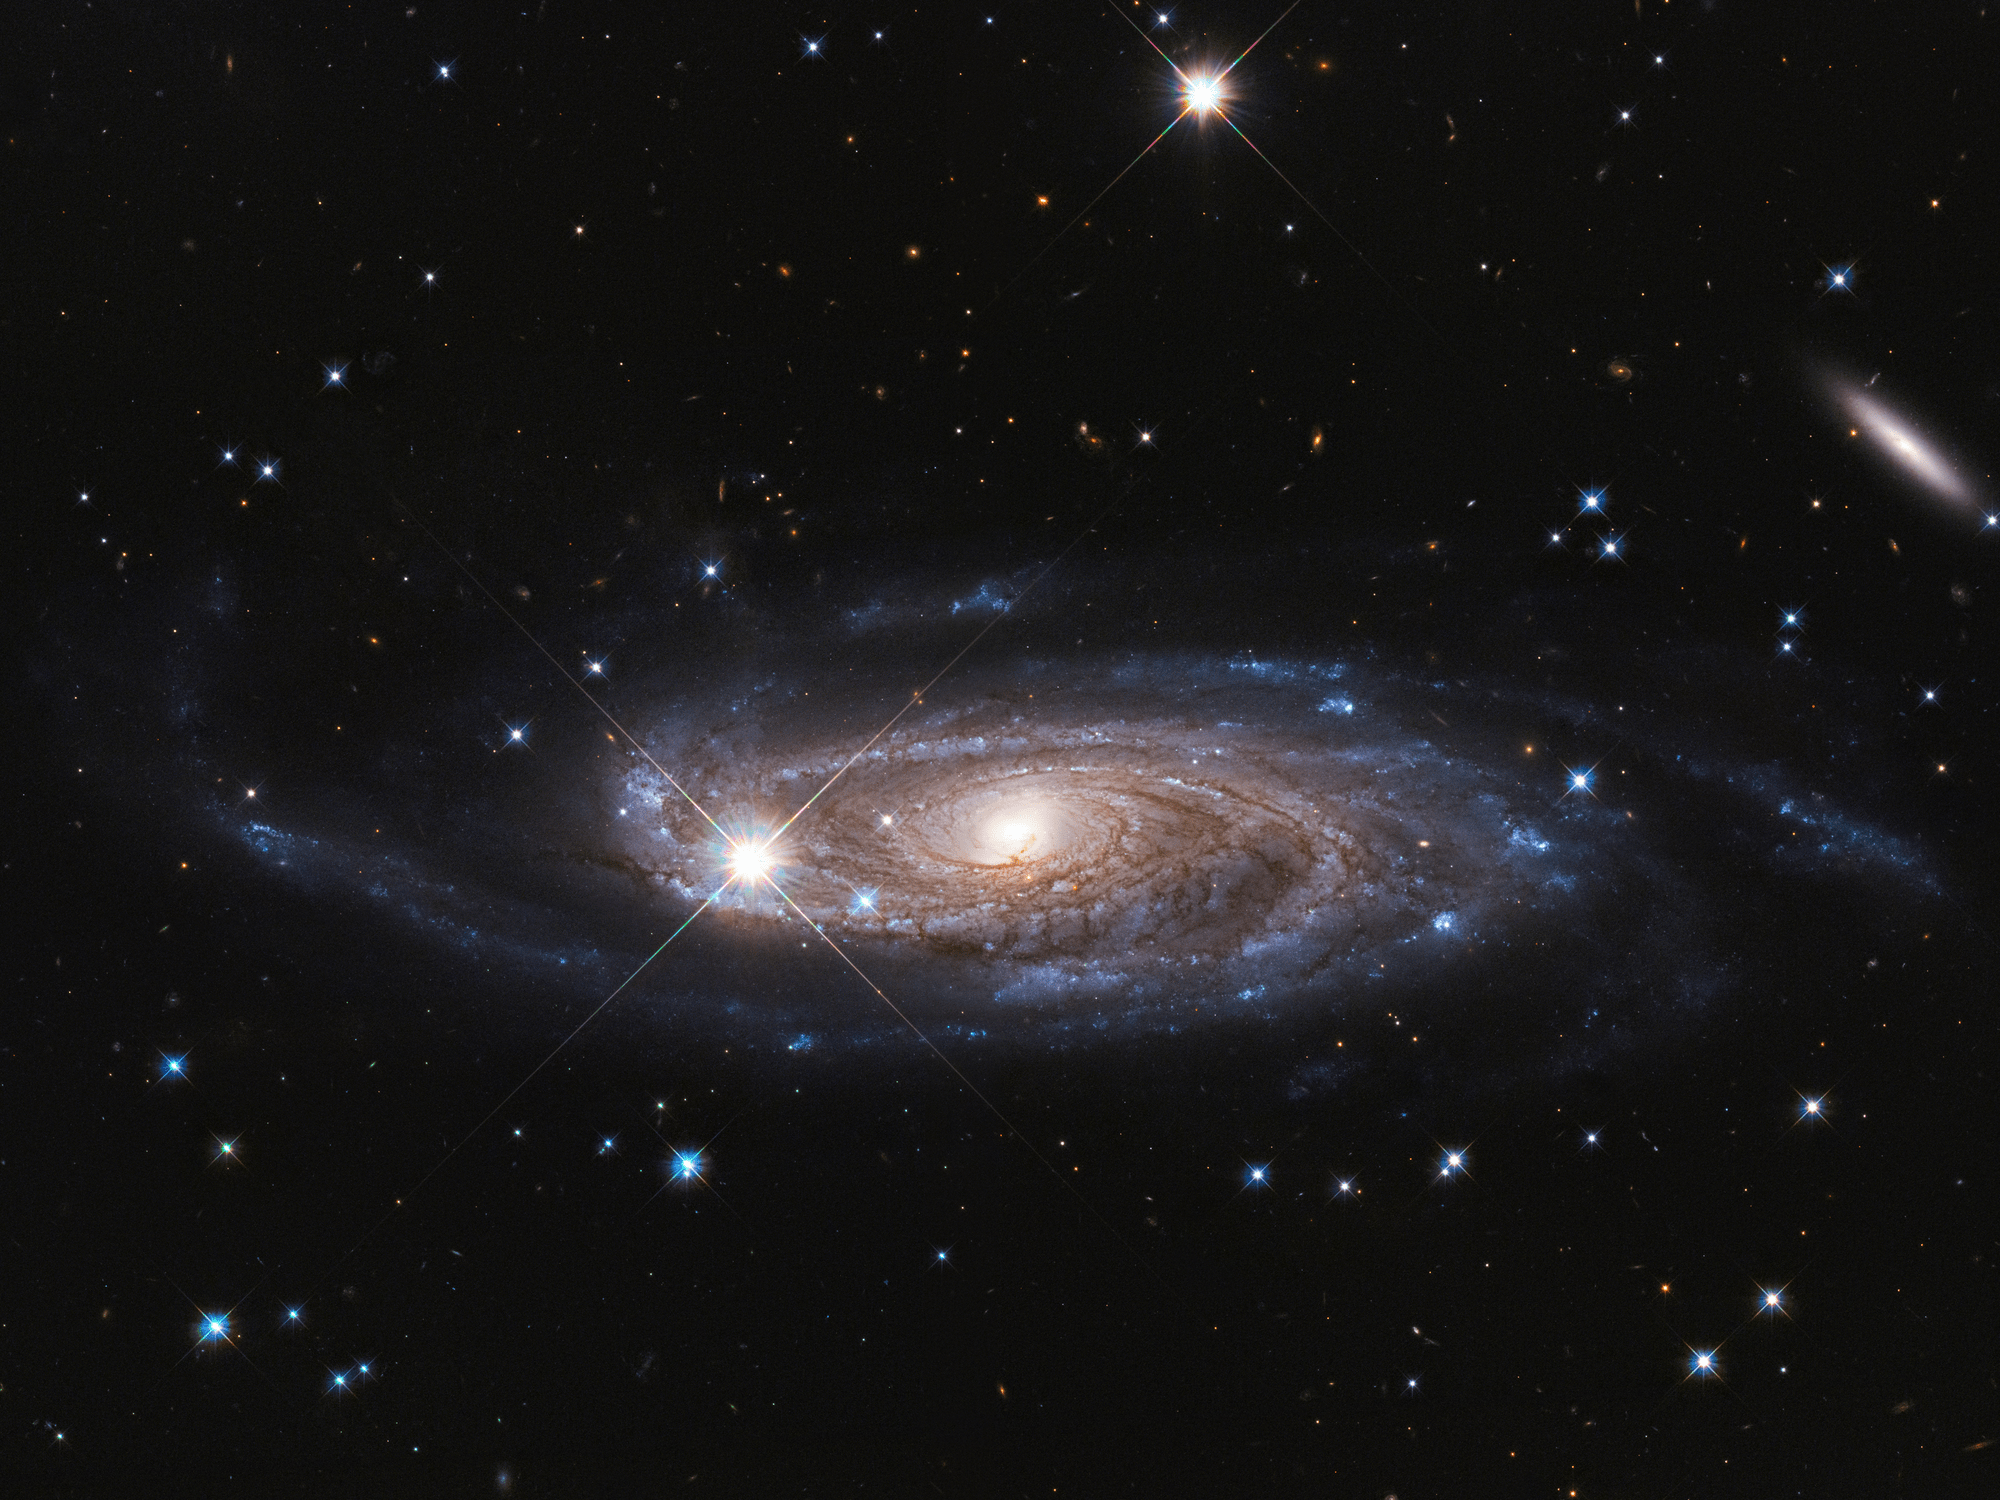 Huge spiral galaxy UGC 2885, located 232 million light-years away in the northern constellation, Perseus.